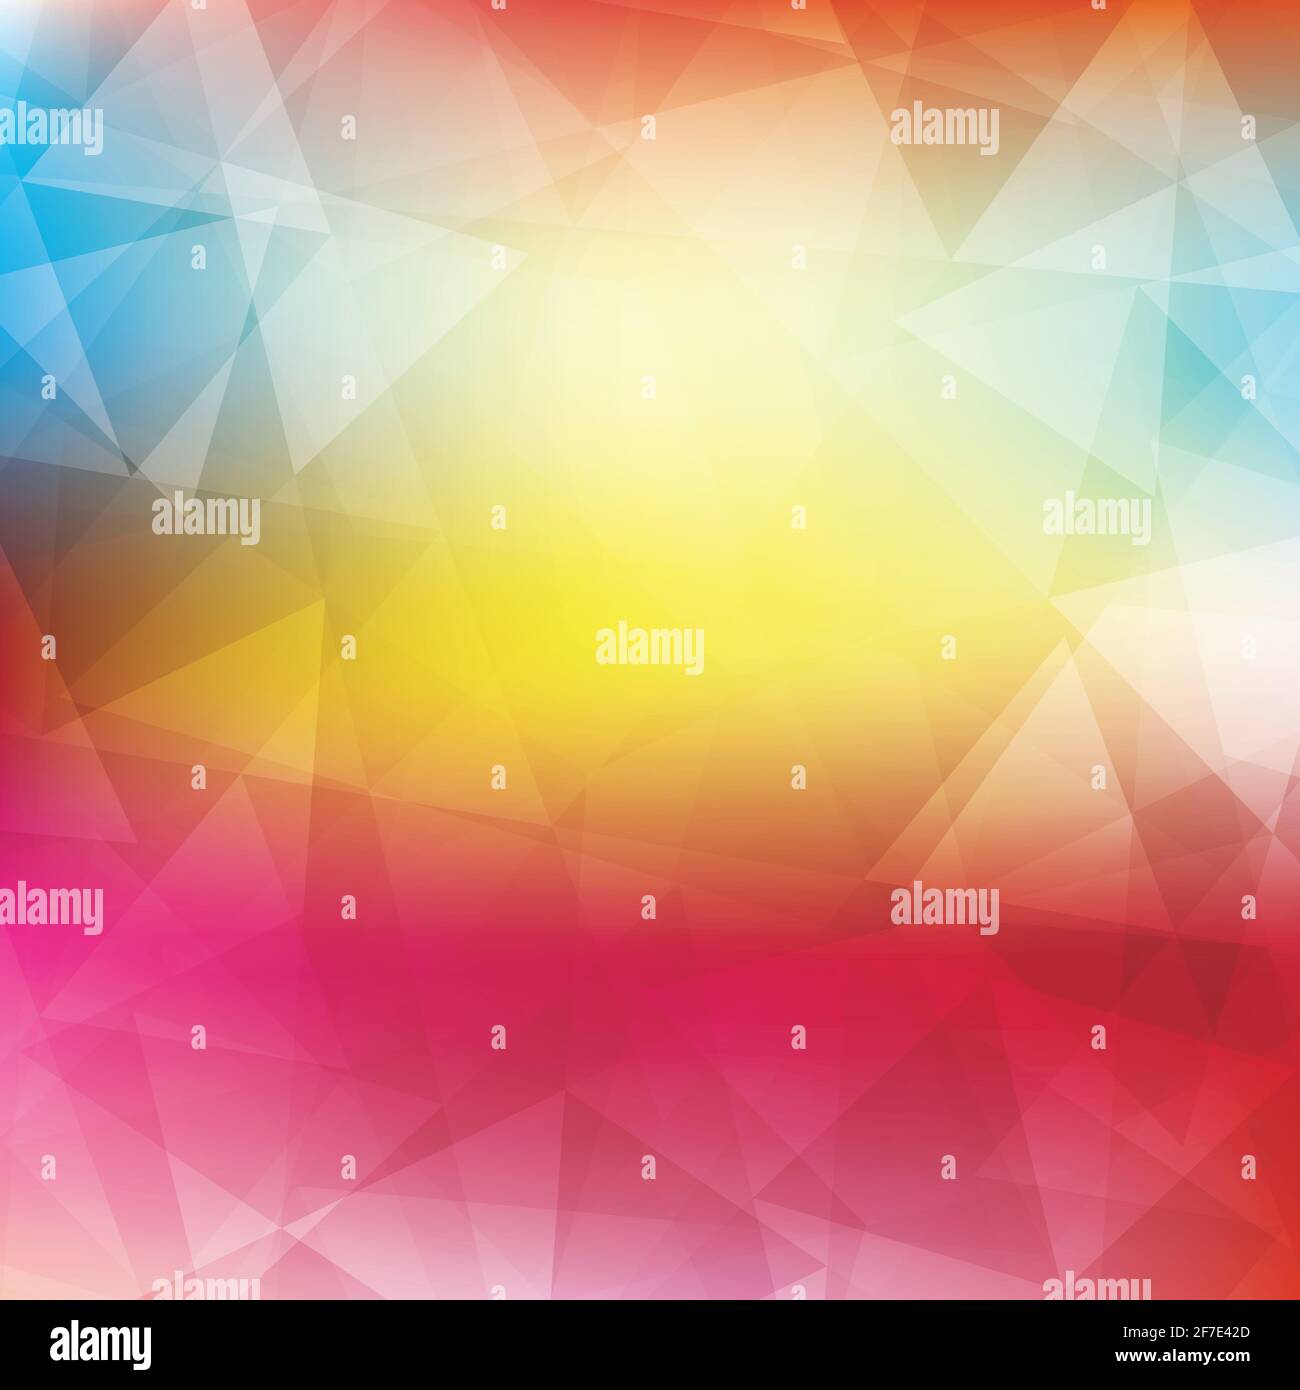 Bright colors pattern textured by triangles. Colorful raster background Stock Photo